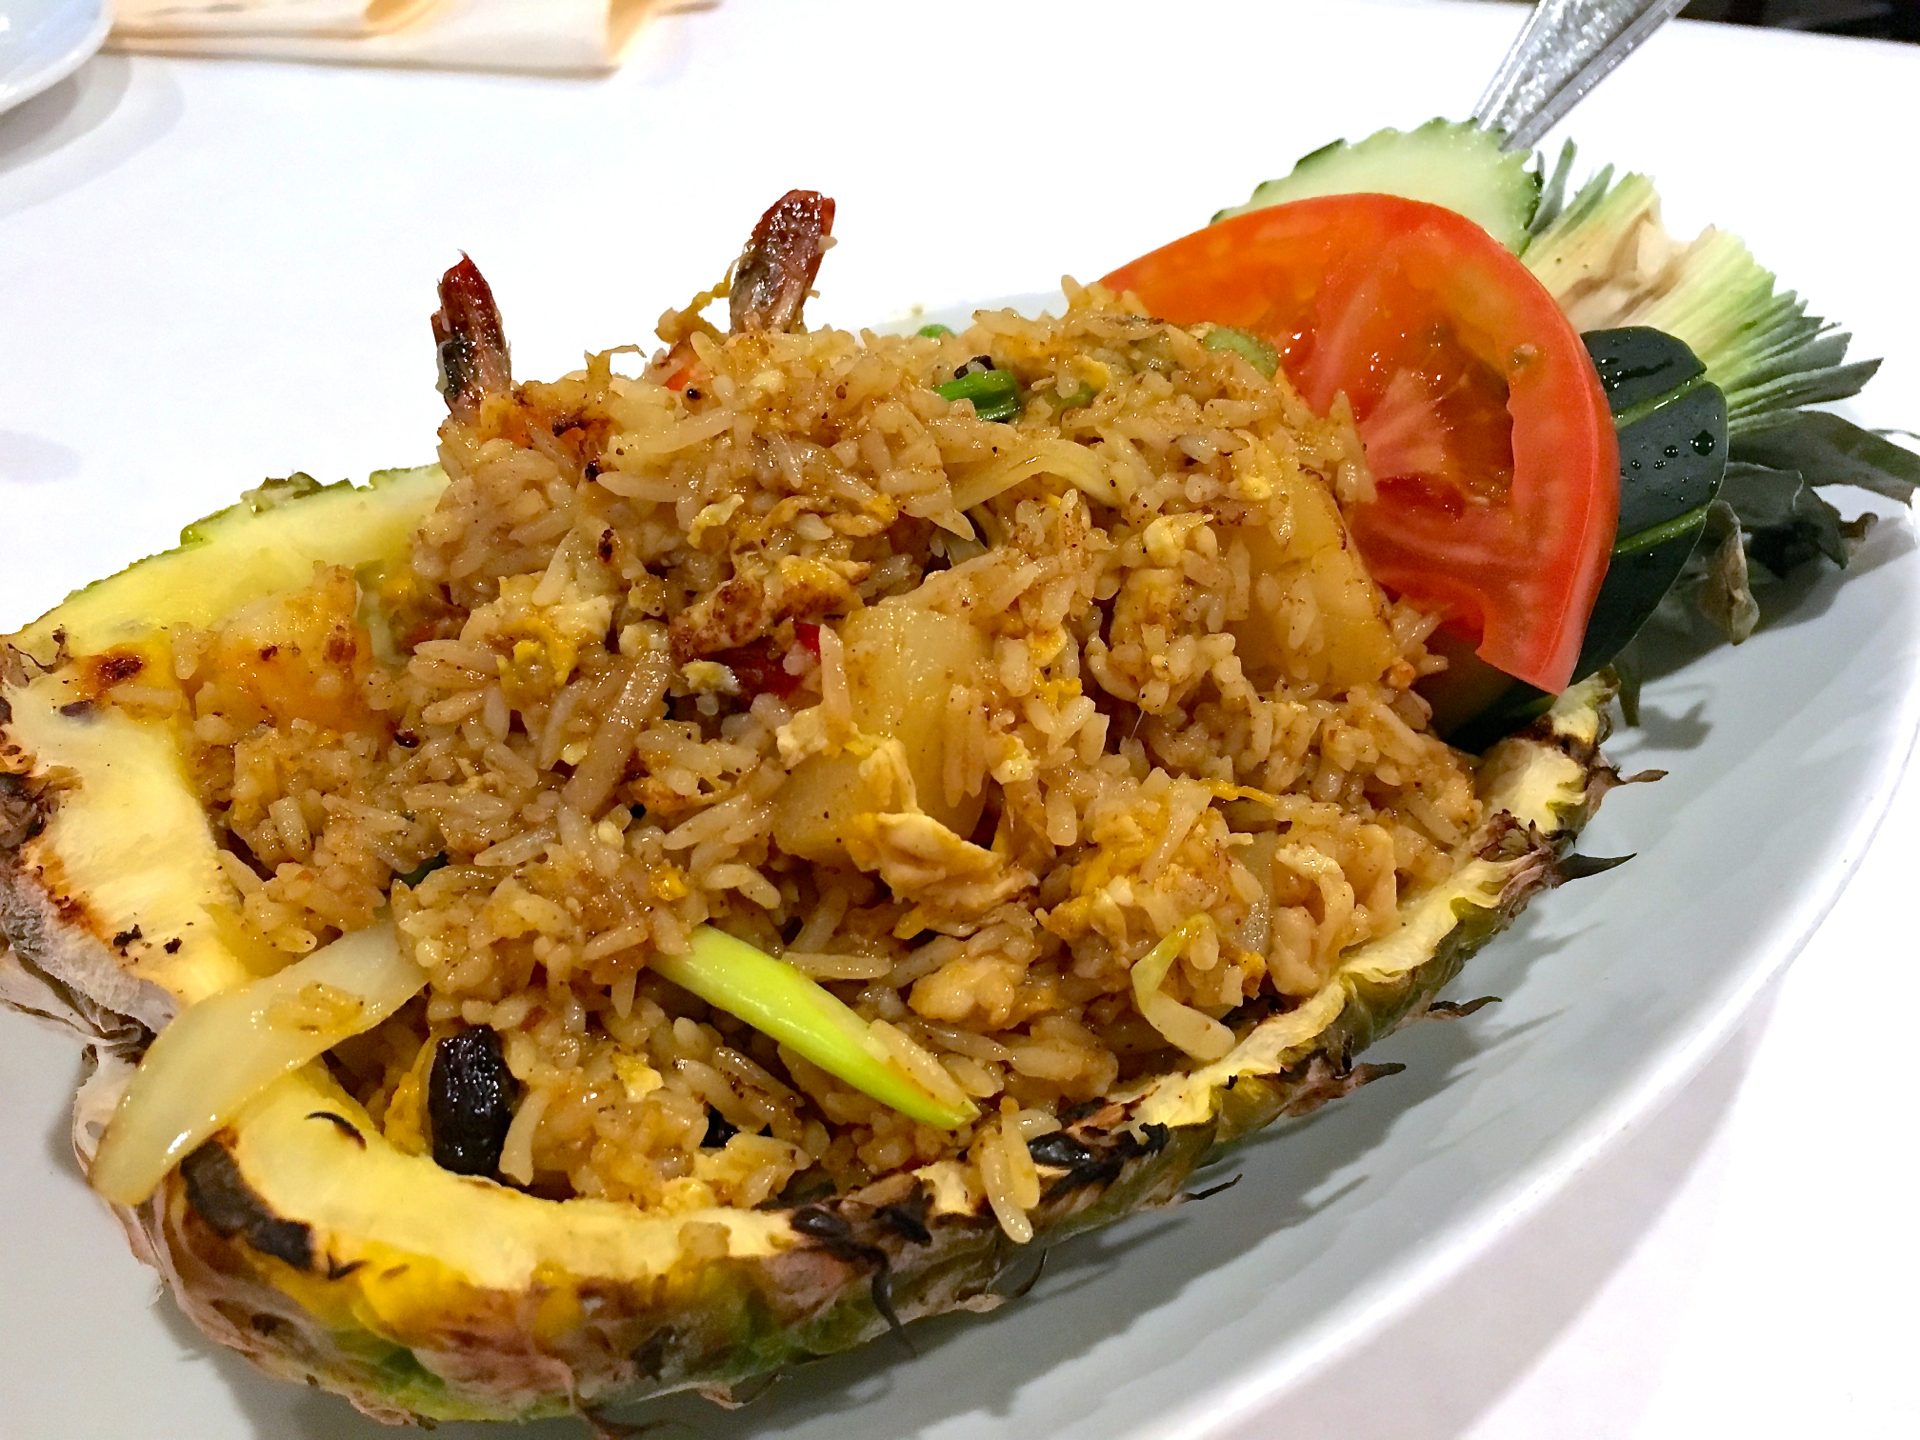 Pineapple fried rice served in a pineapple at Shana Thai.